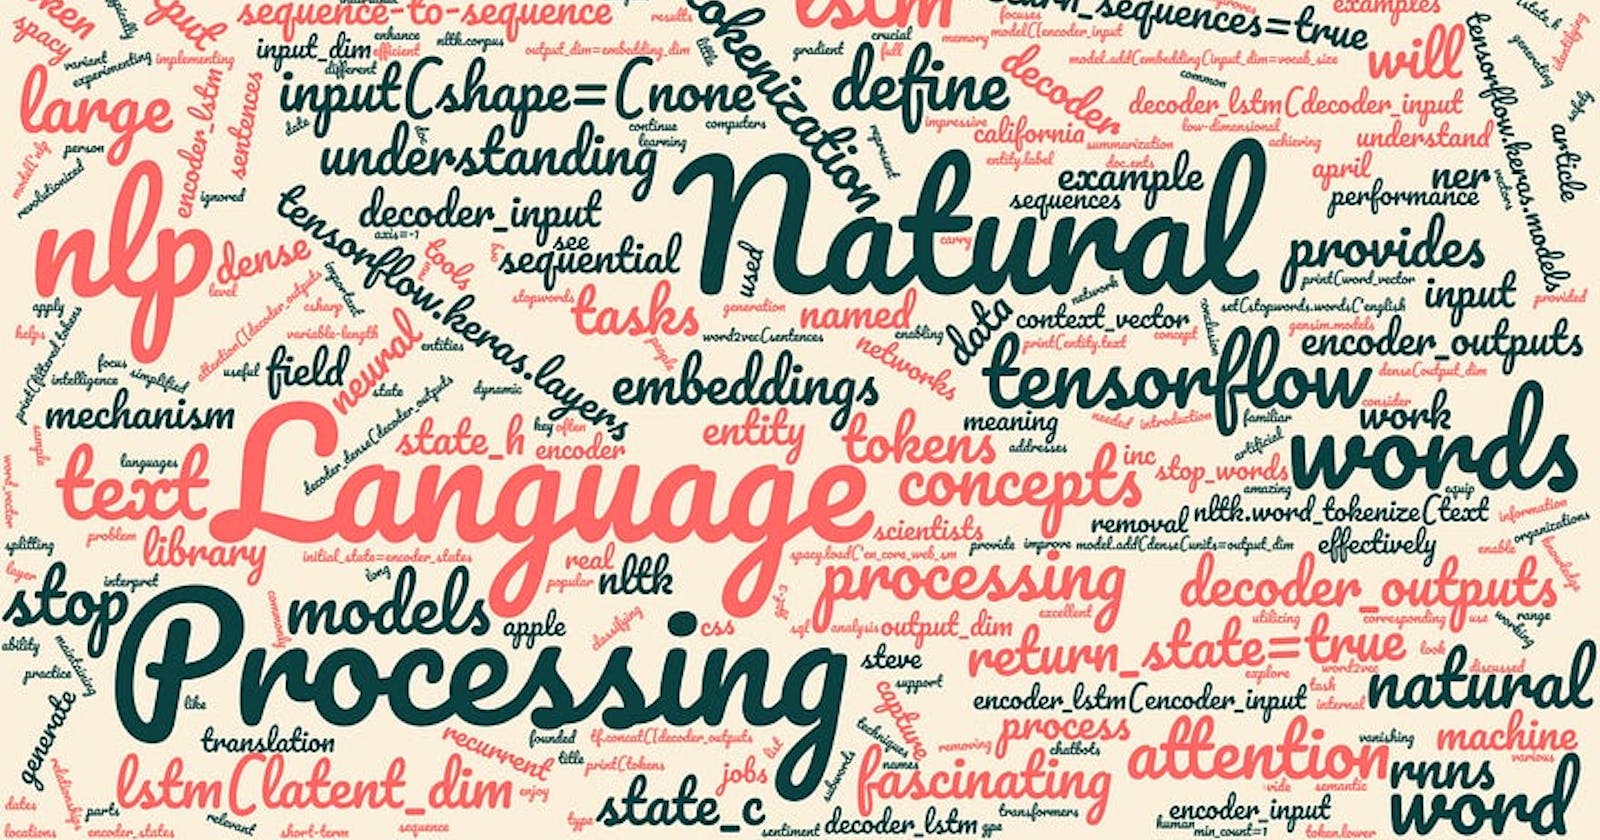 Essential NLP Concepts for Understanding Large Language Models